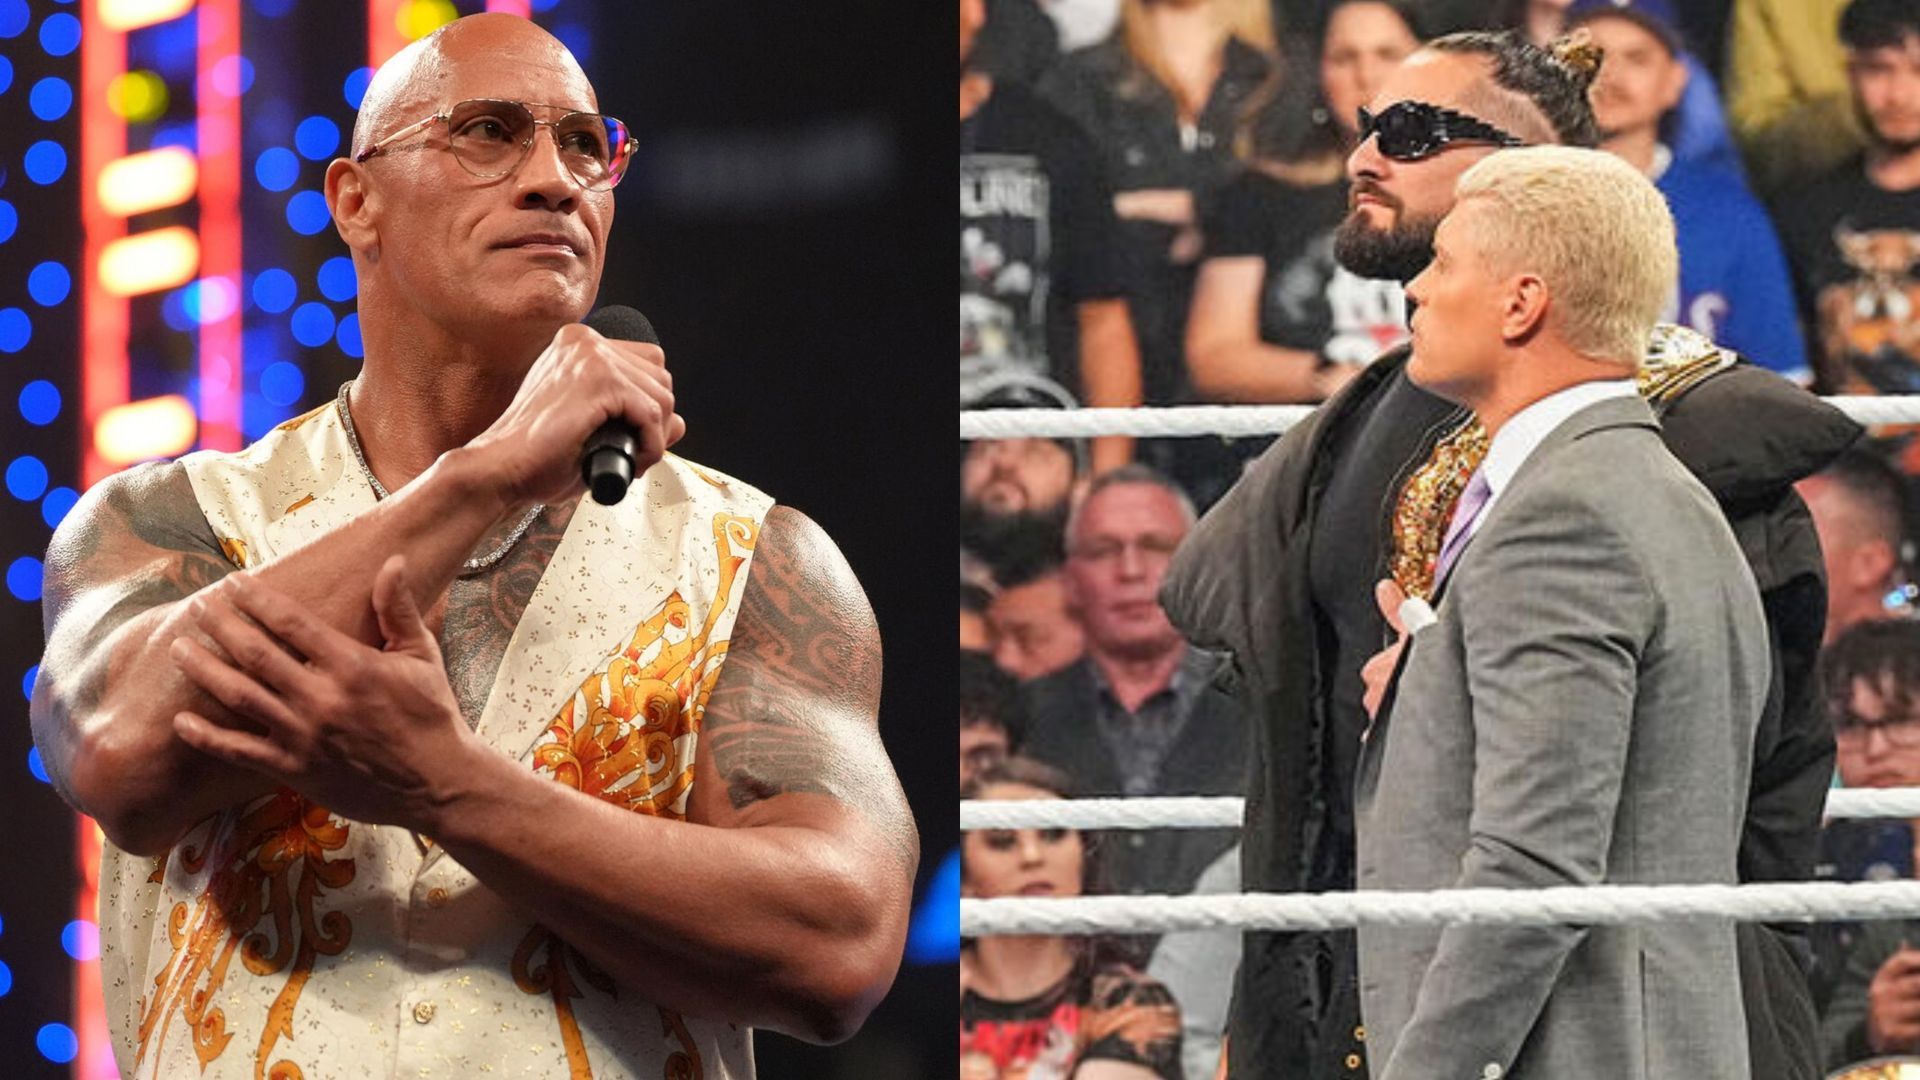 The Rock and Roman Reigns will face Cody Rhodes and Seth Rollins at WWE WrestleMania